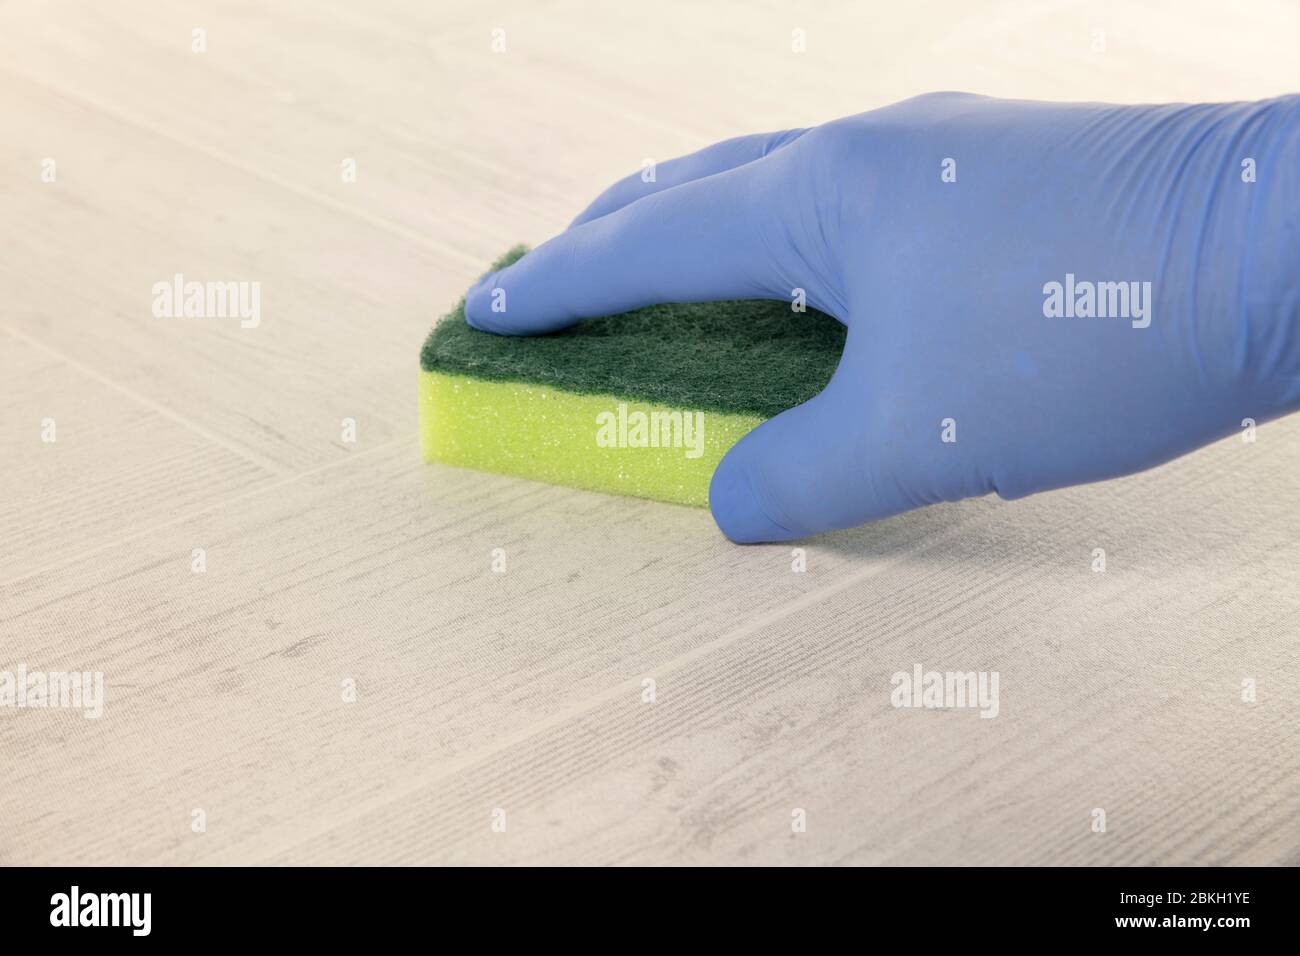 hand with blue rubber glove cleaning a floor with a green and yellow cleaning tool Stock Photo